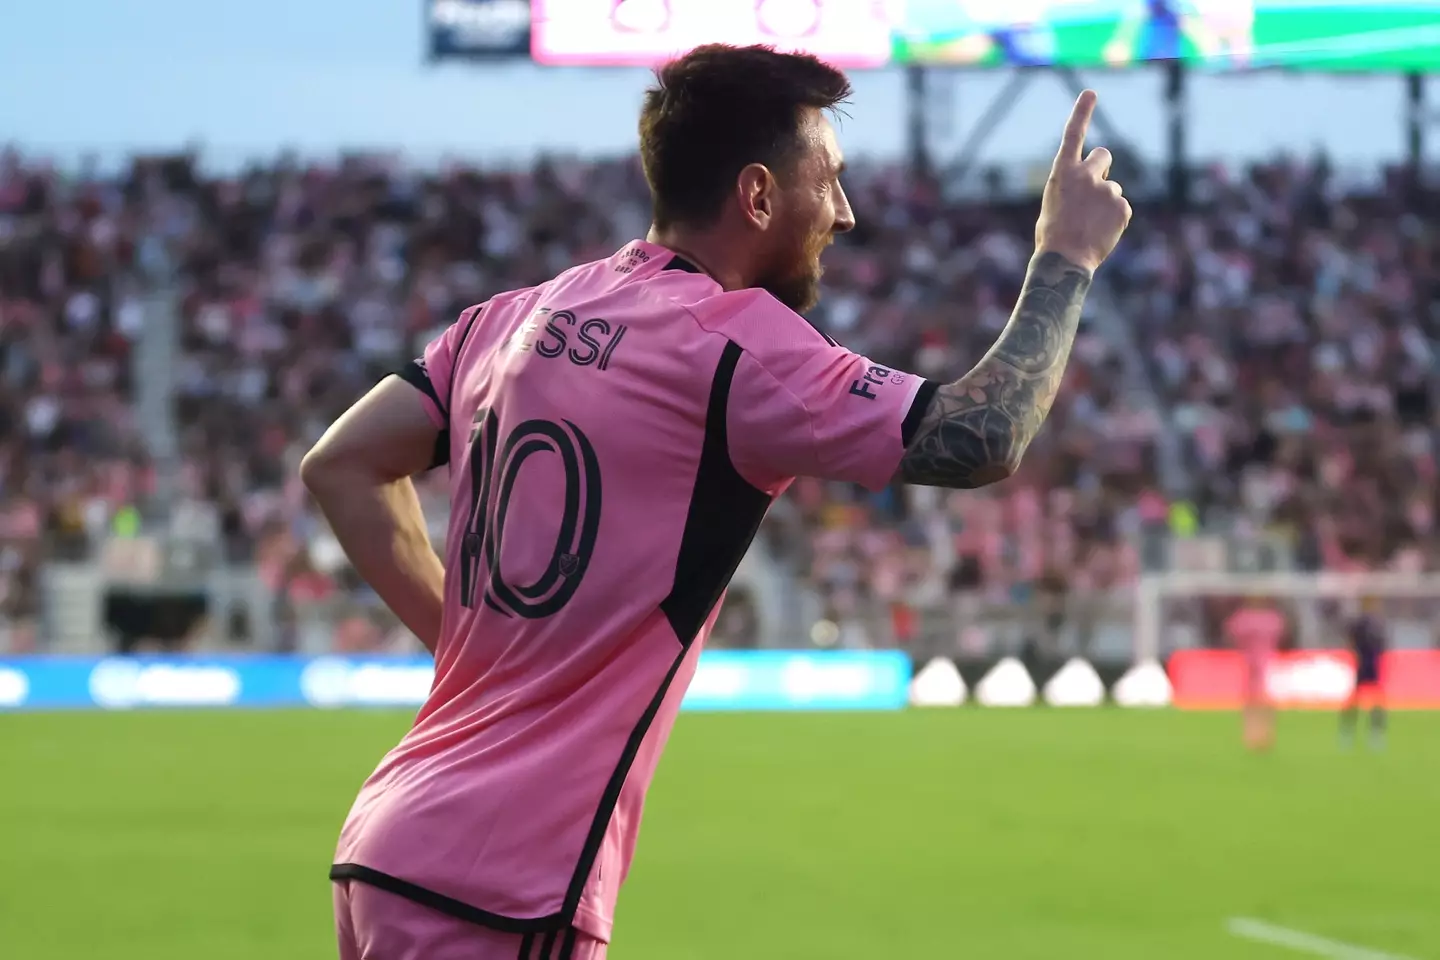 Messi netted a brace in a 5-0 rout